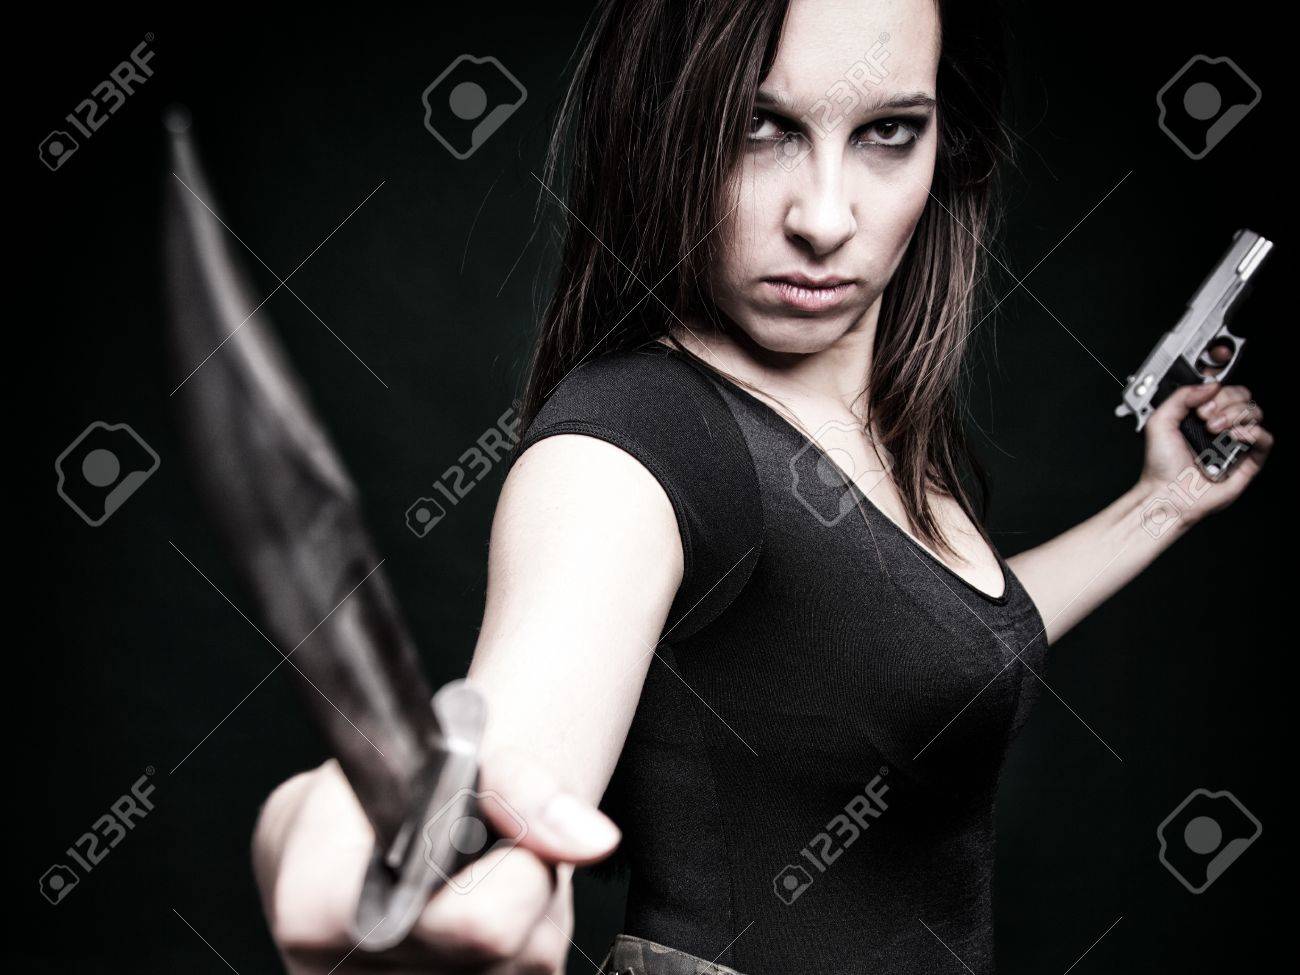 13382509-Sexy-young-woman-in-red-with-a-gun-knife-on-green-background-Stock-Photo.jpg